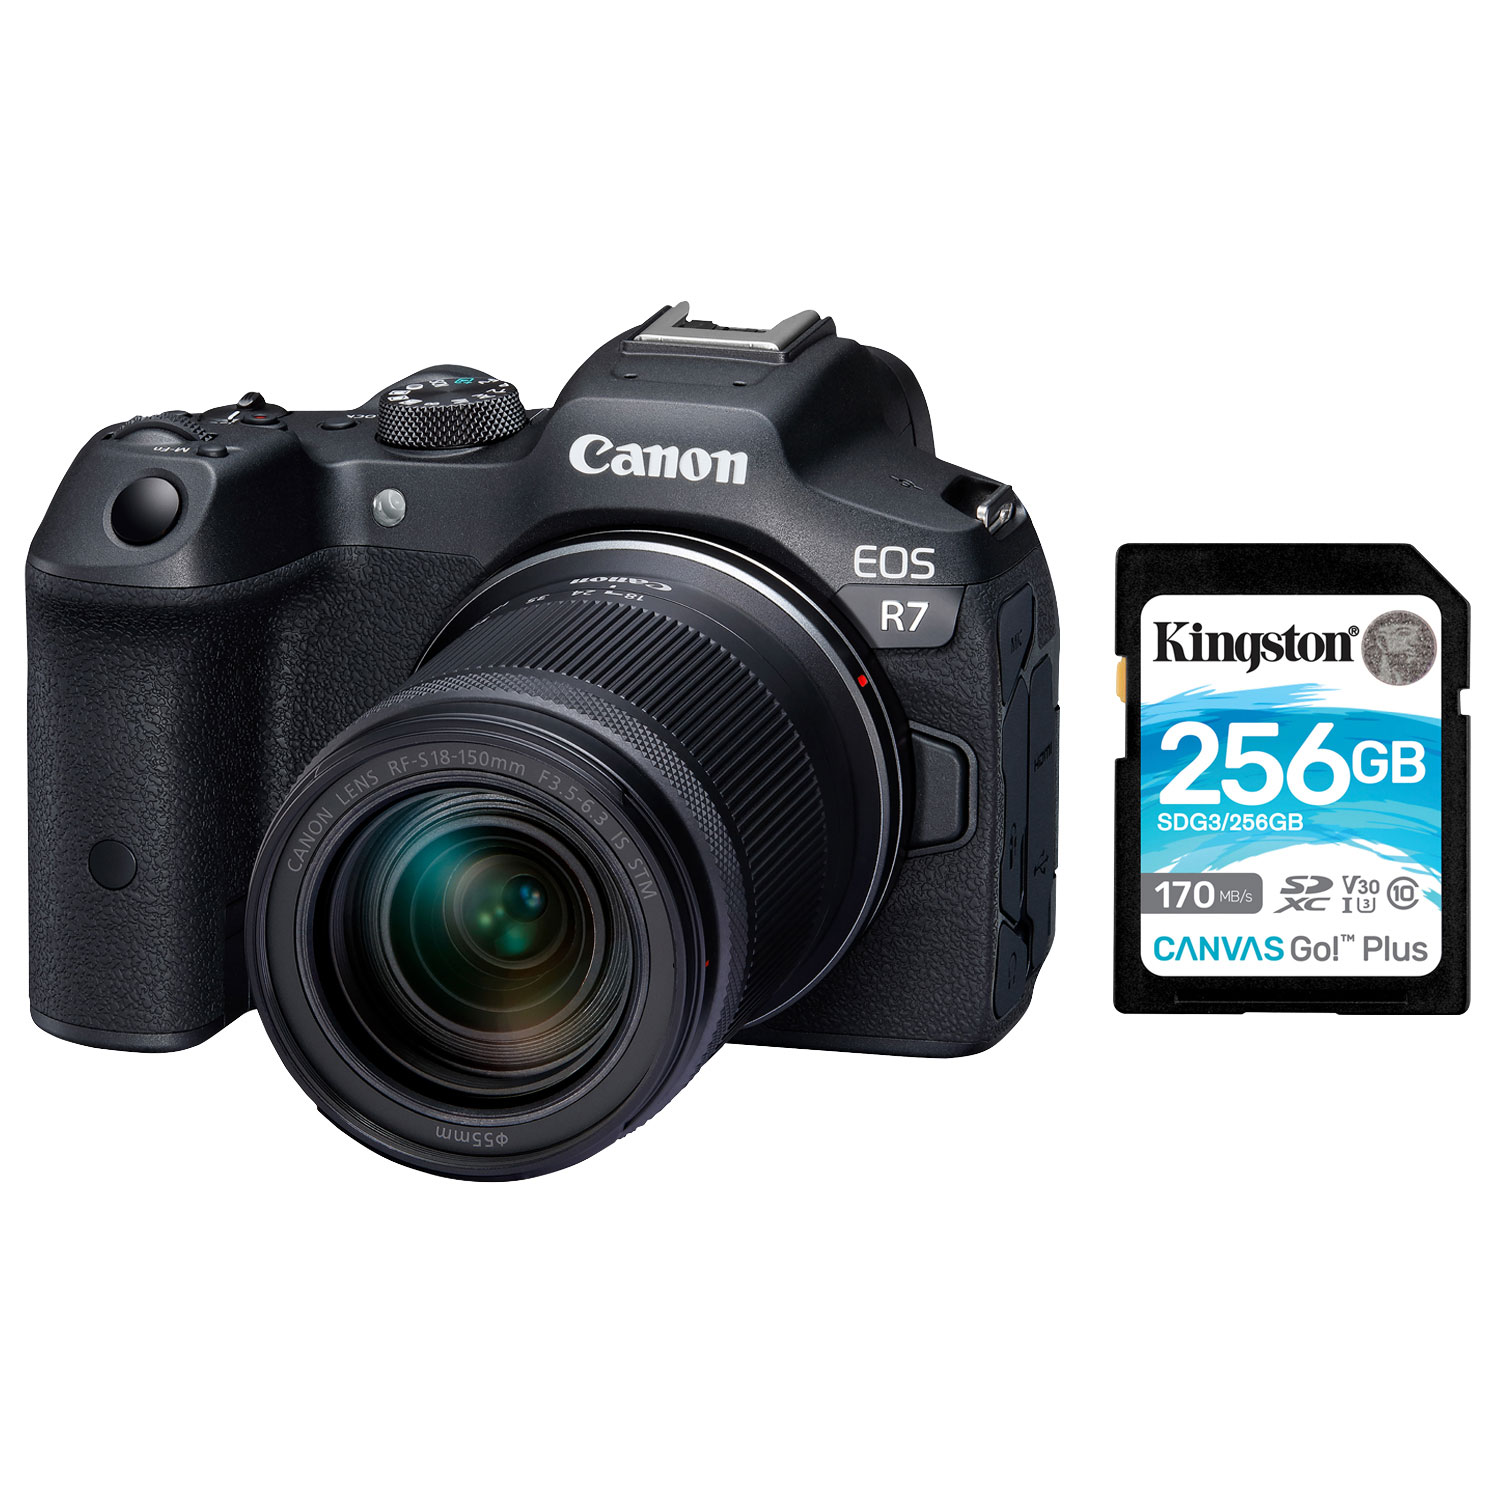 Canon EOS R7 Mirrorless Camera with 18-150mm STM Lens Kit & 256GB 170MB/s SDXC Memory Card